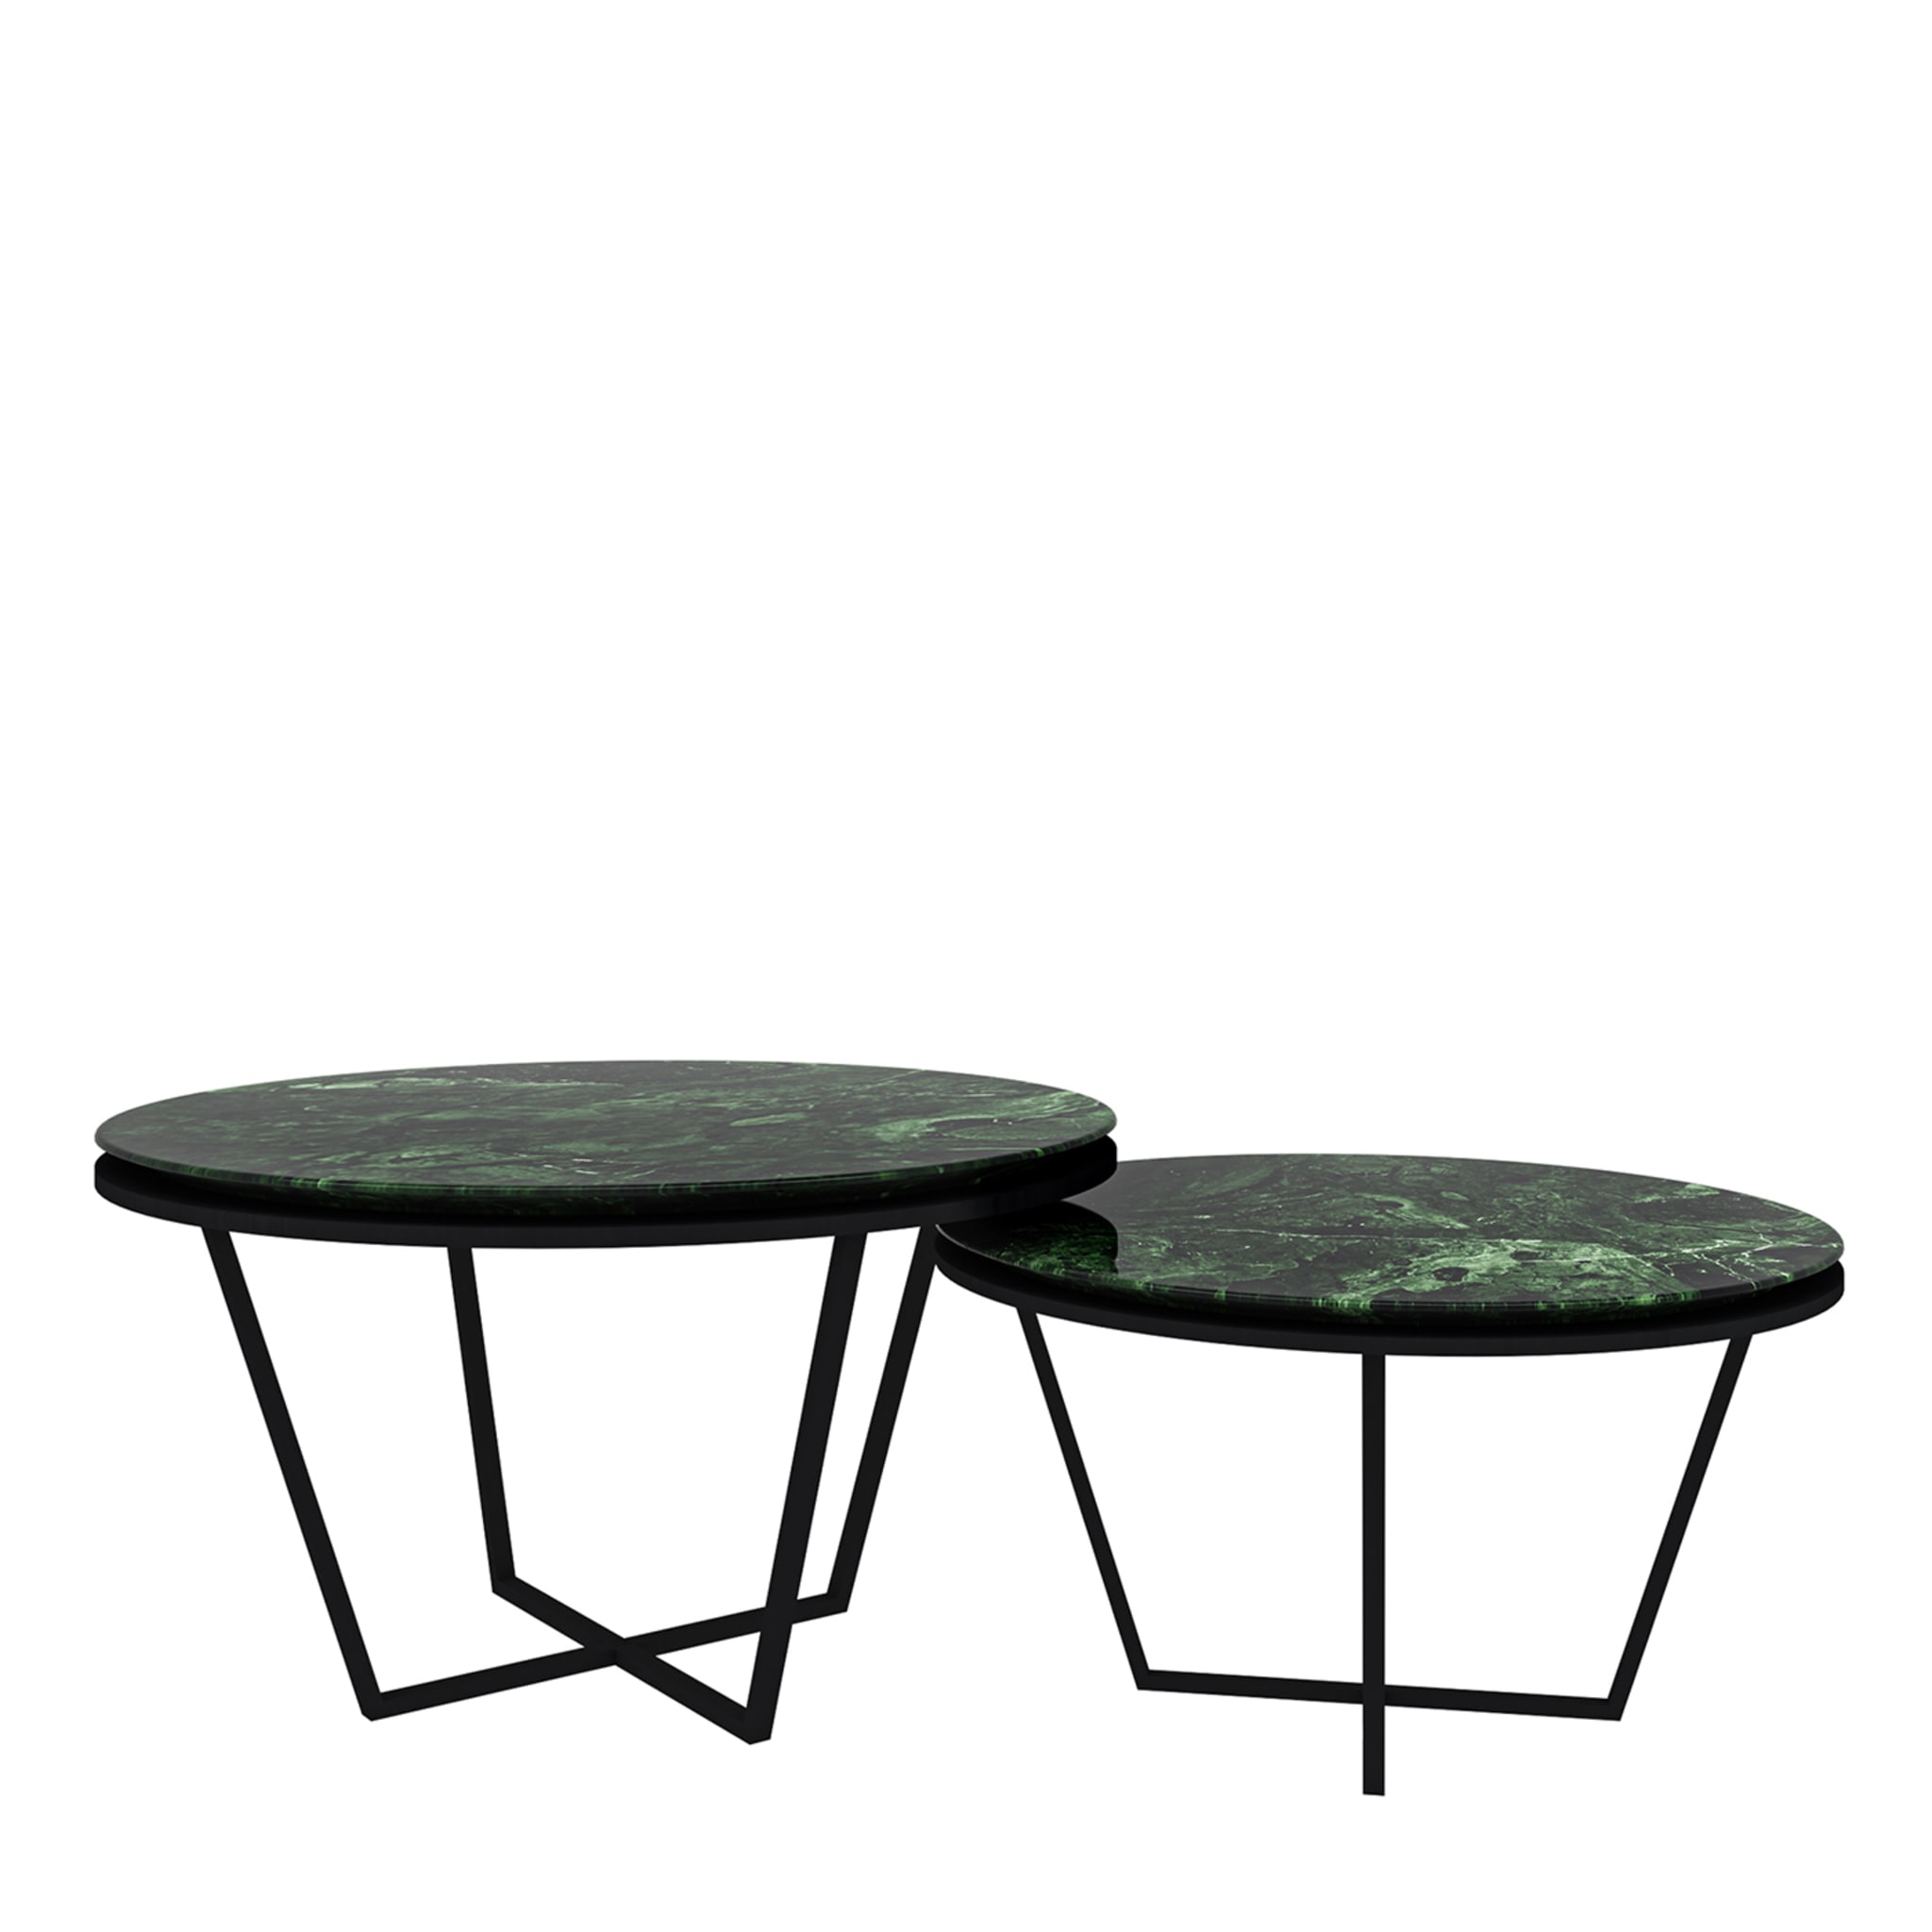 Set of 2 Different-Height Round Verde Alpi Marble Coffee Tables - Main view